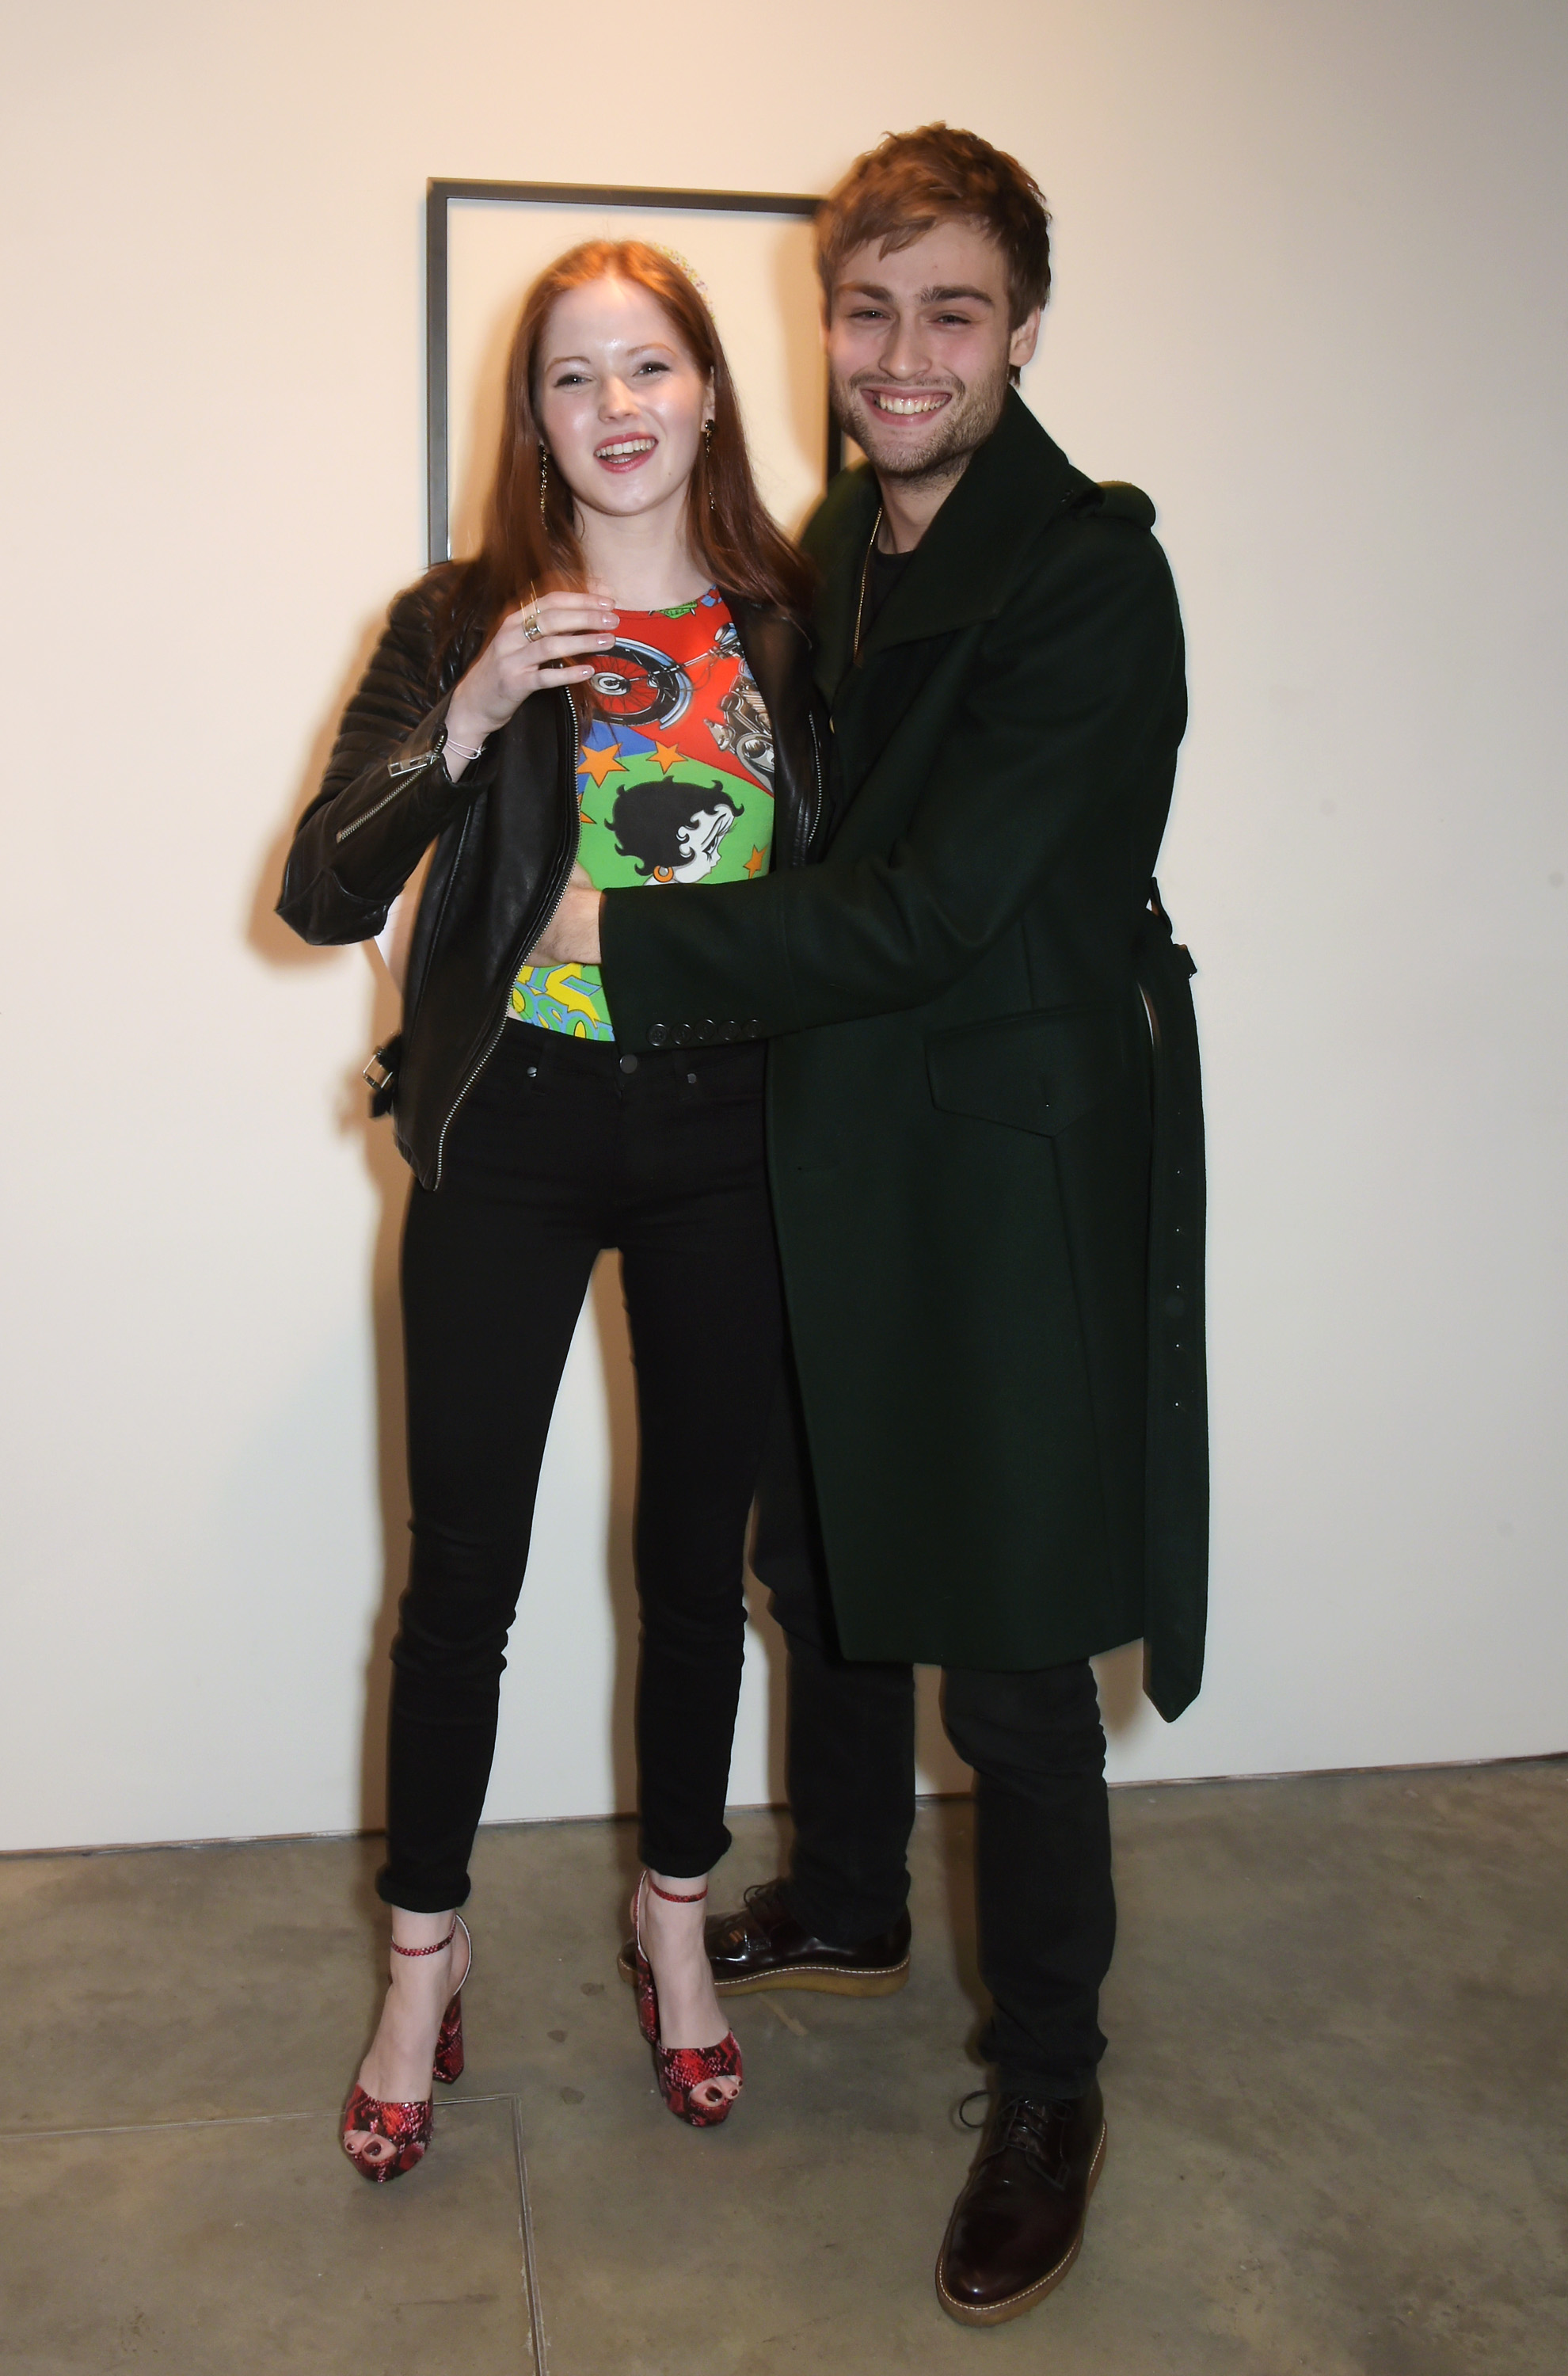 Ellie Bamber (L) and Douglas Booth attend a private view of "The Top Ten" by artist Hayden Kays at The Cob Gallery, on April 2, 2015, in London, England. | Source: Getty Images